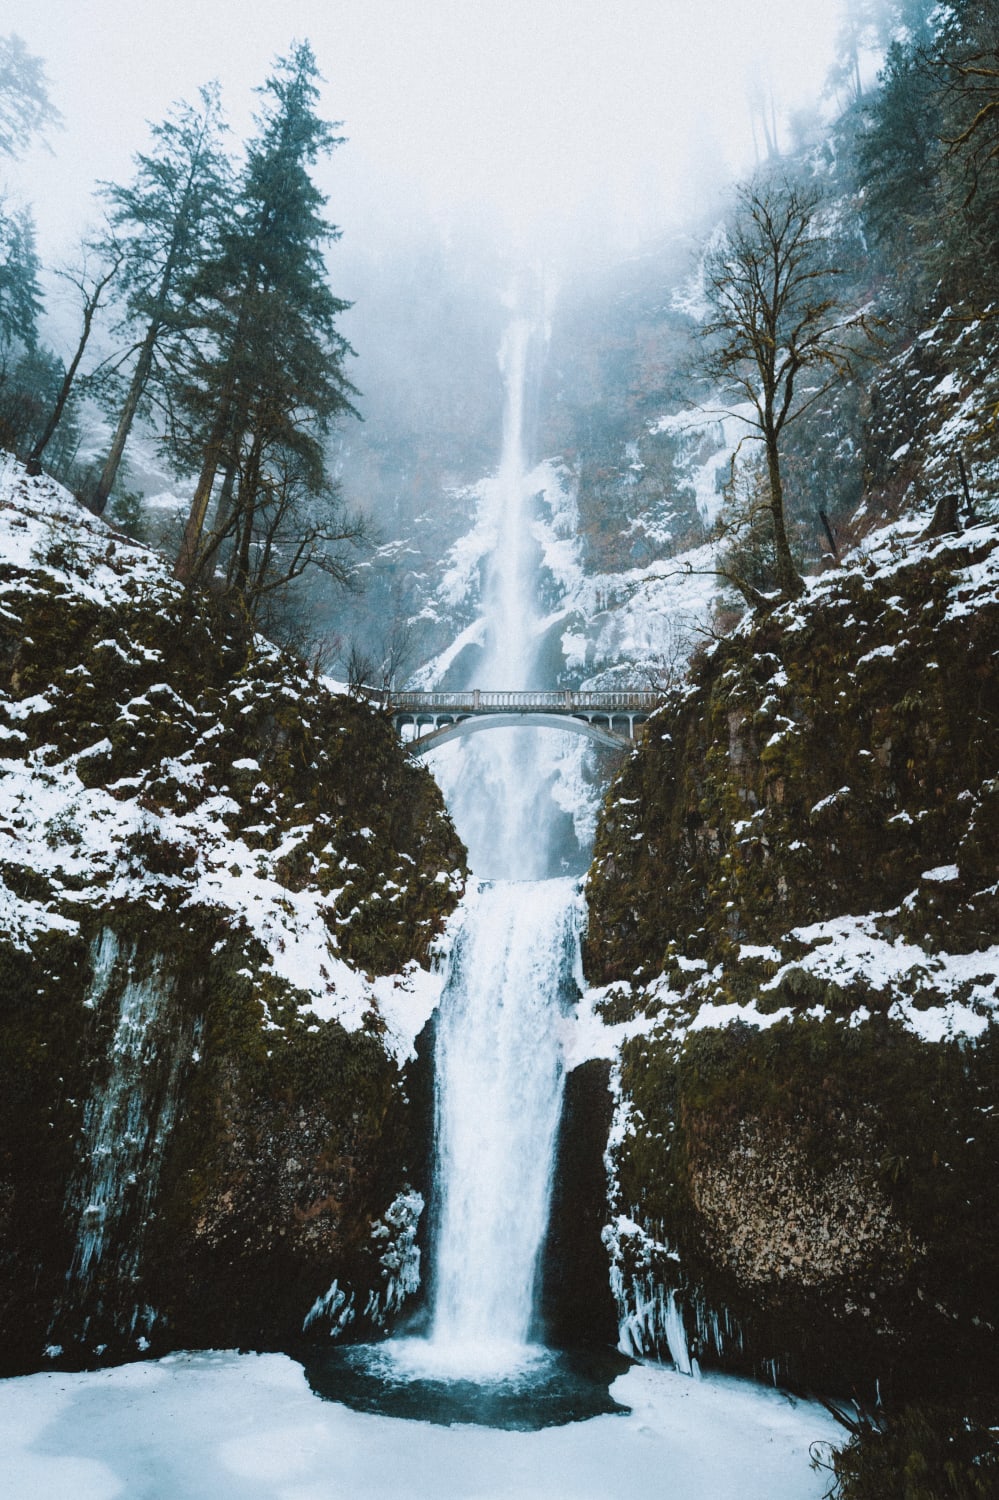 Oregon is looking beautiful this winter.